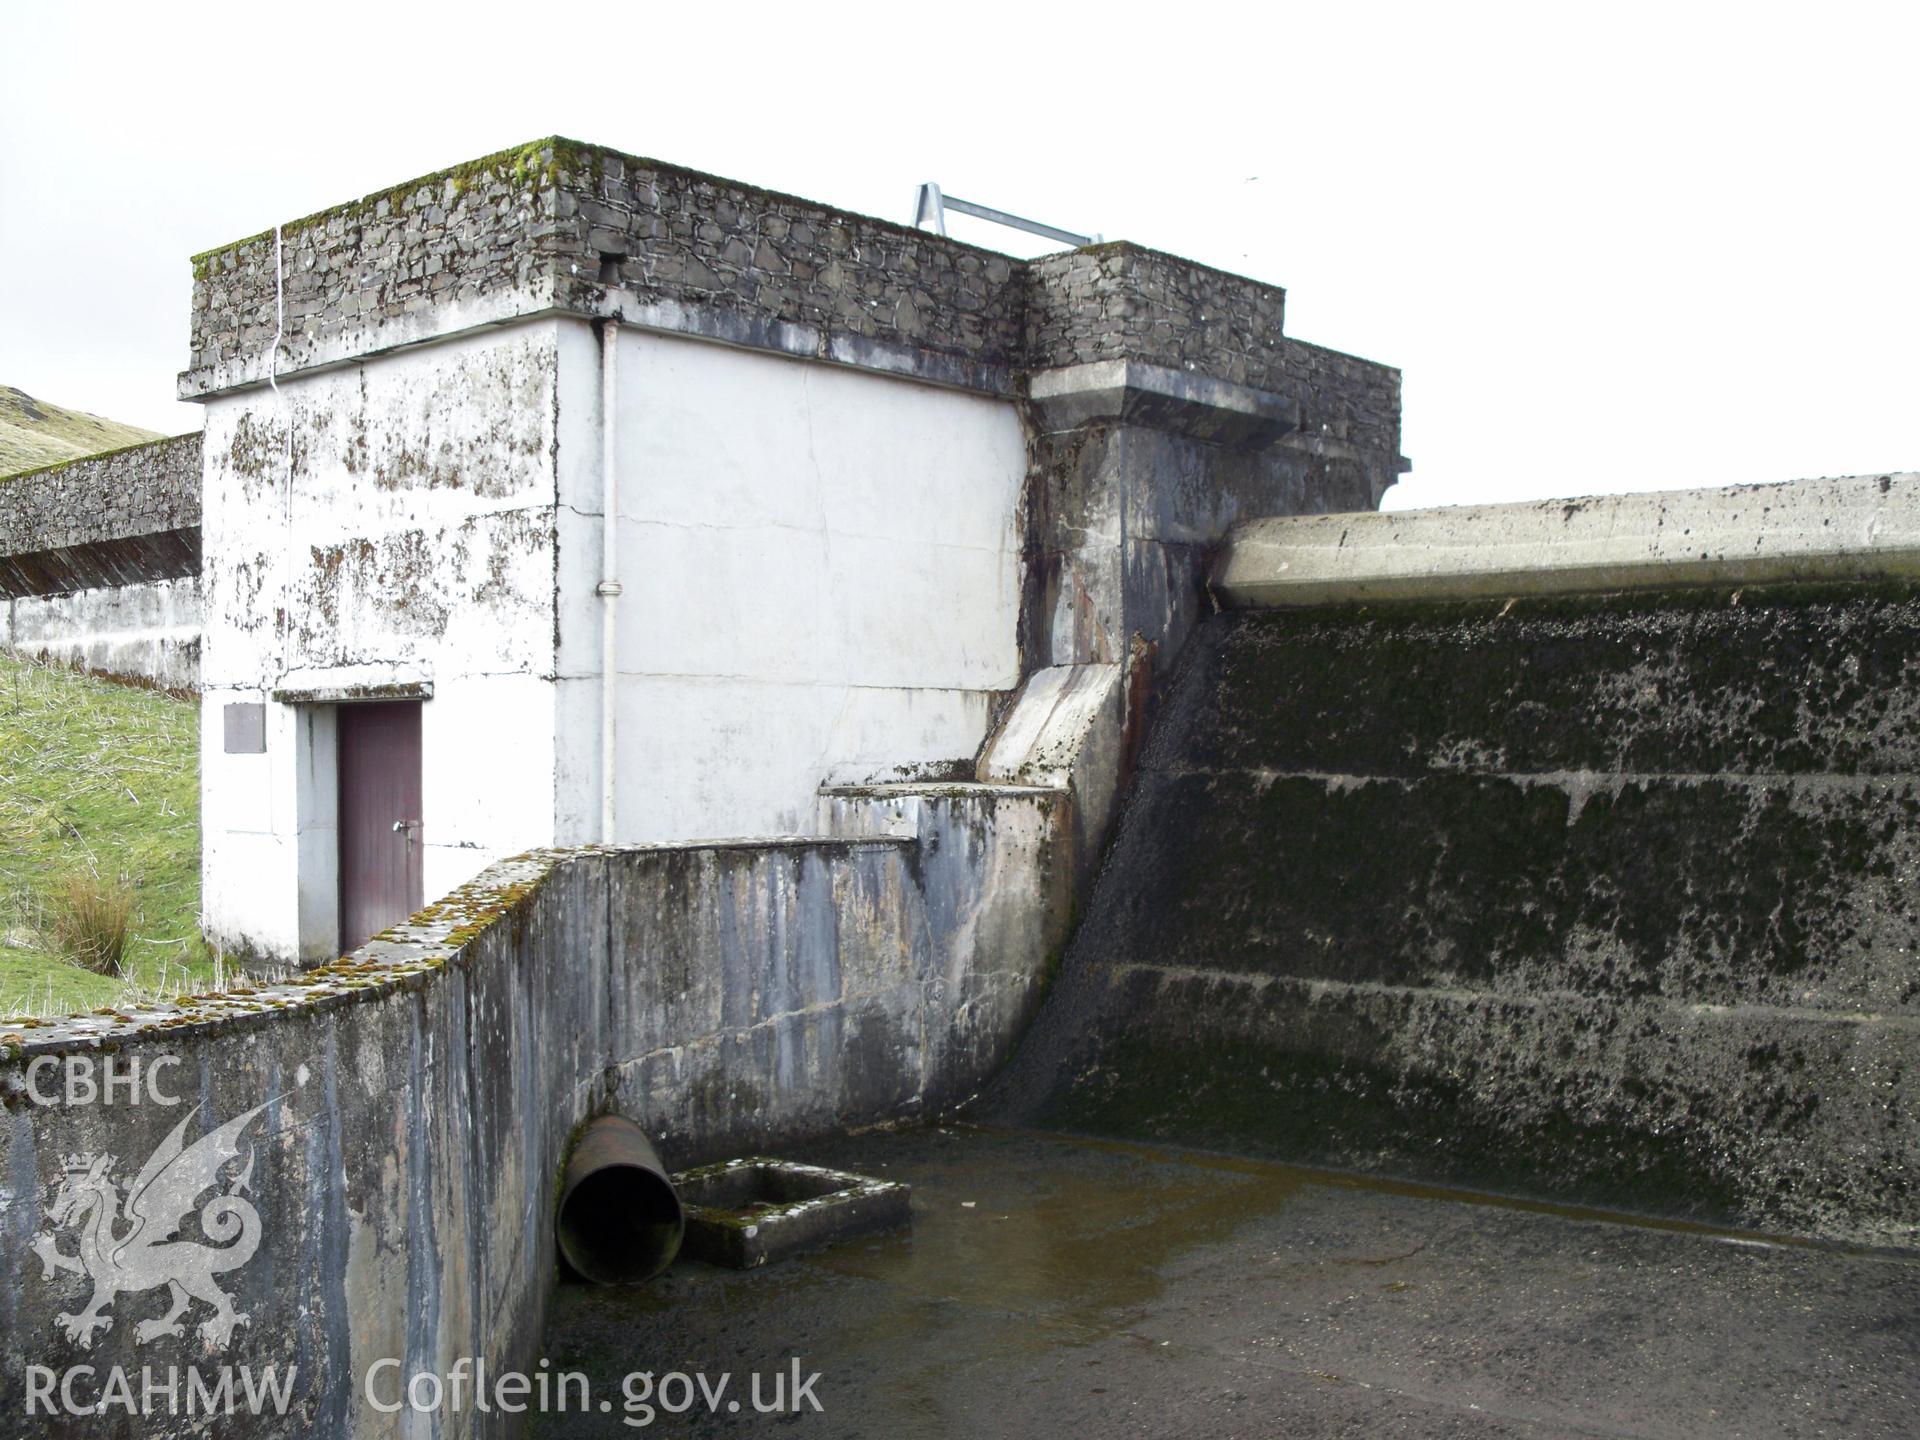 Llyn Egnant dam regulation tower/valve house, taken from the south-east.